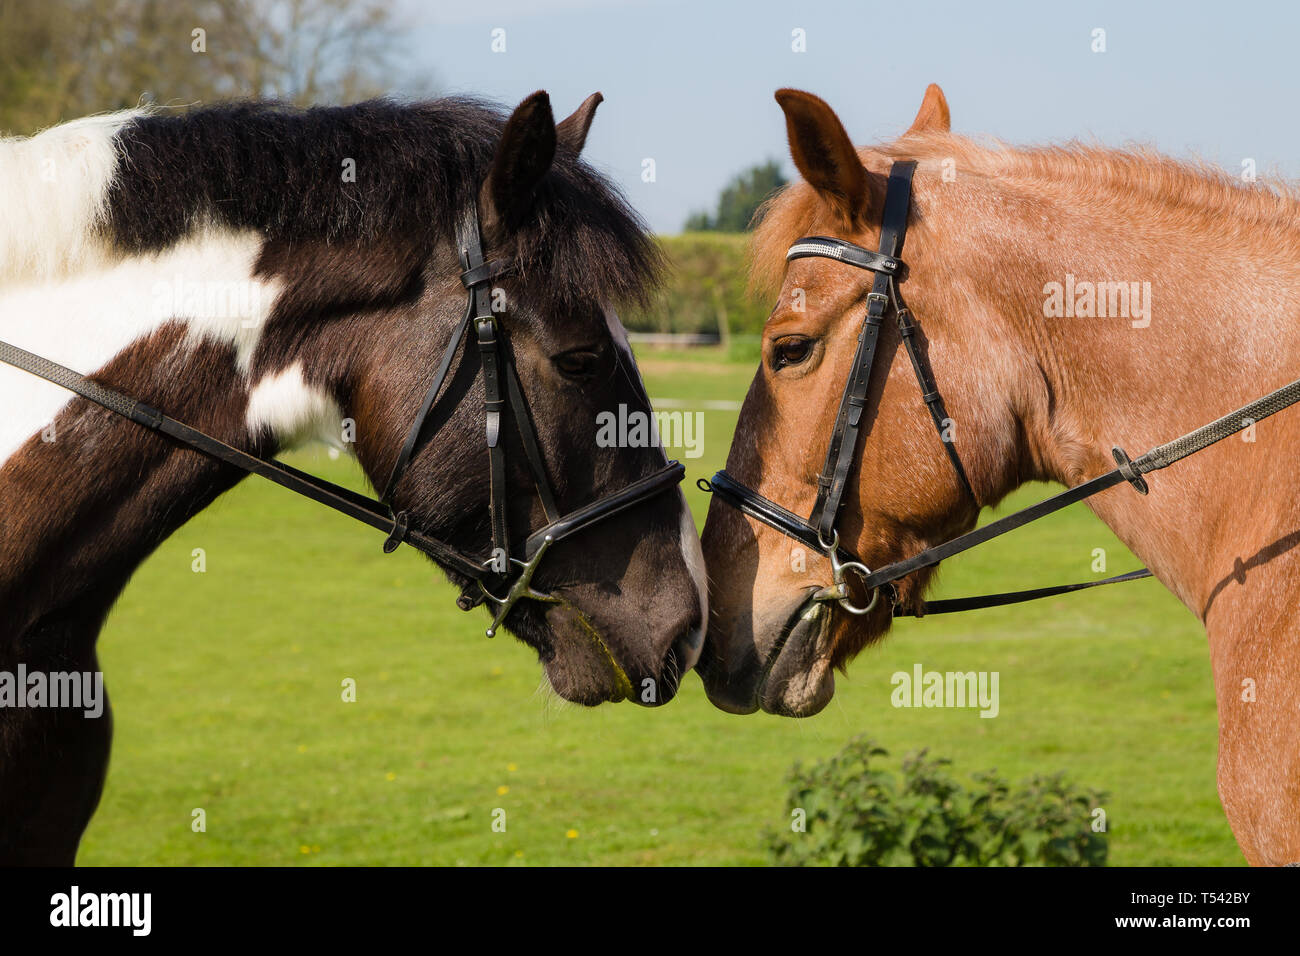 Kent. UK. Two horse showing affection by touching heads on a sunny day in Kent.England. Stock Photo